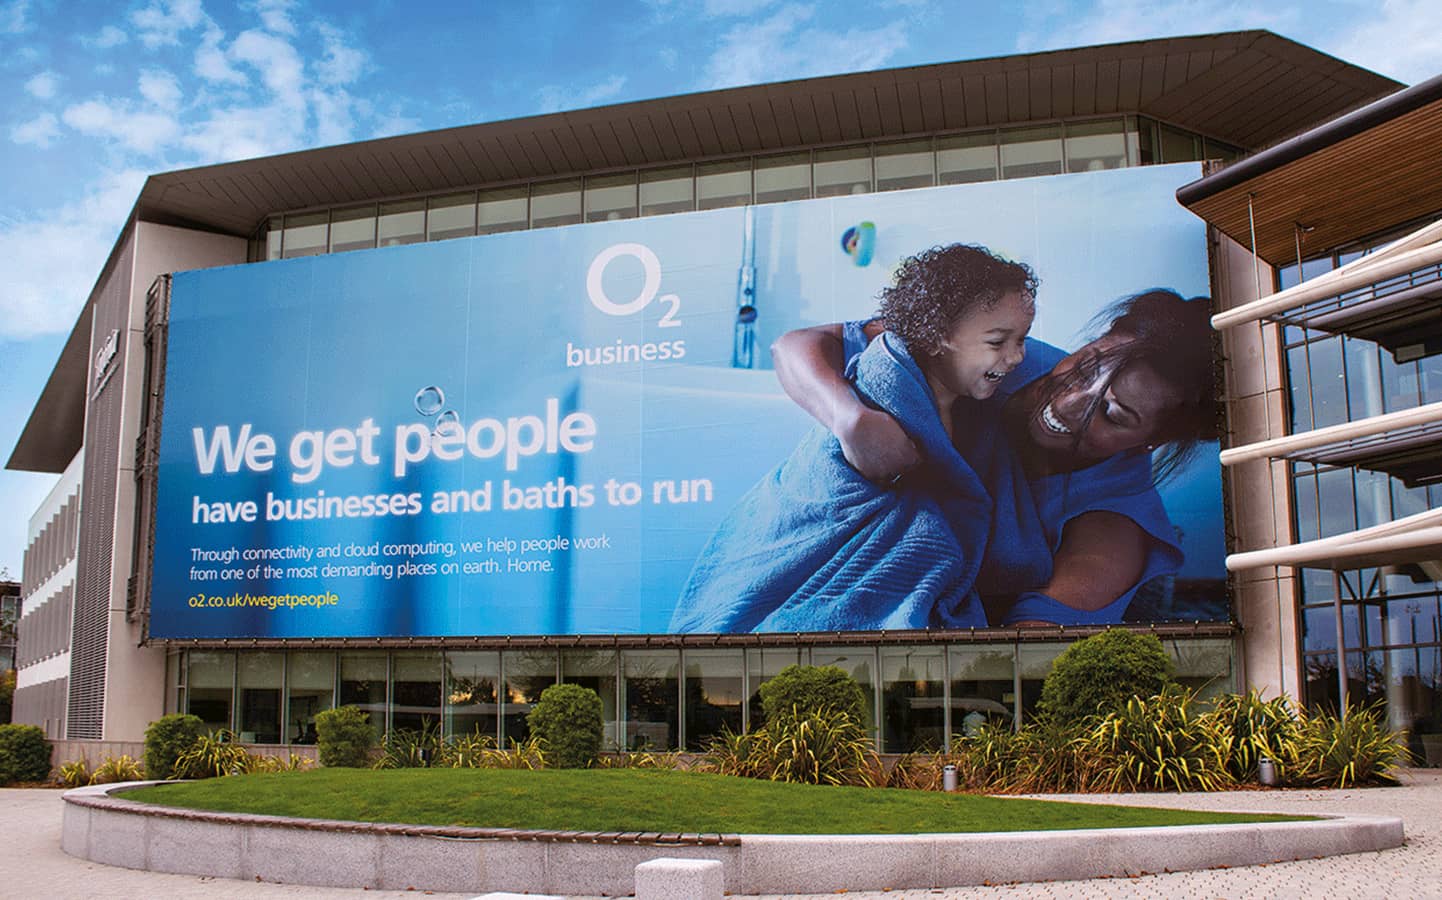 A new look and narrative helped O2 Business become the UK’s most trusted ICT supplier Image